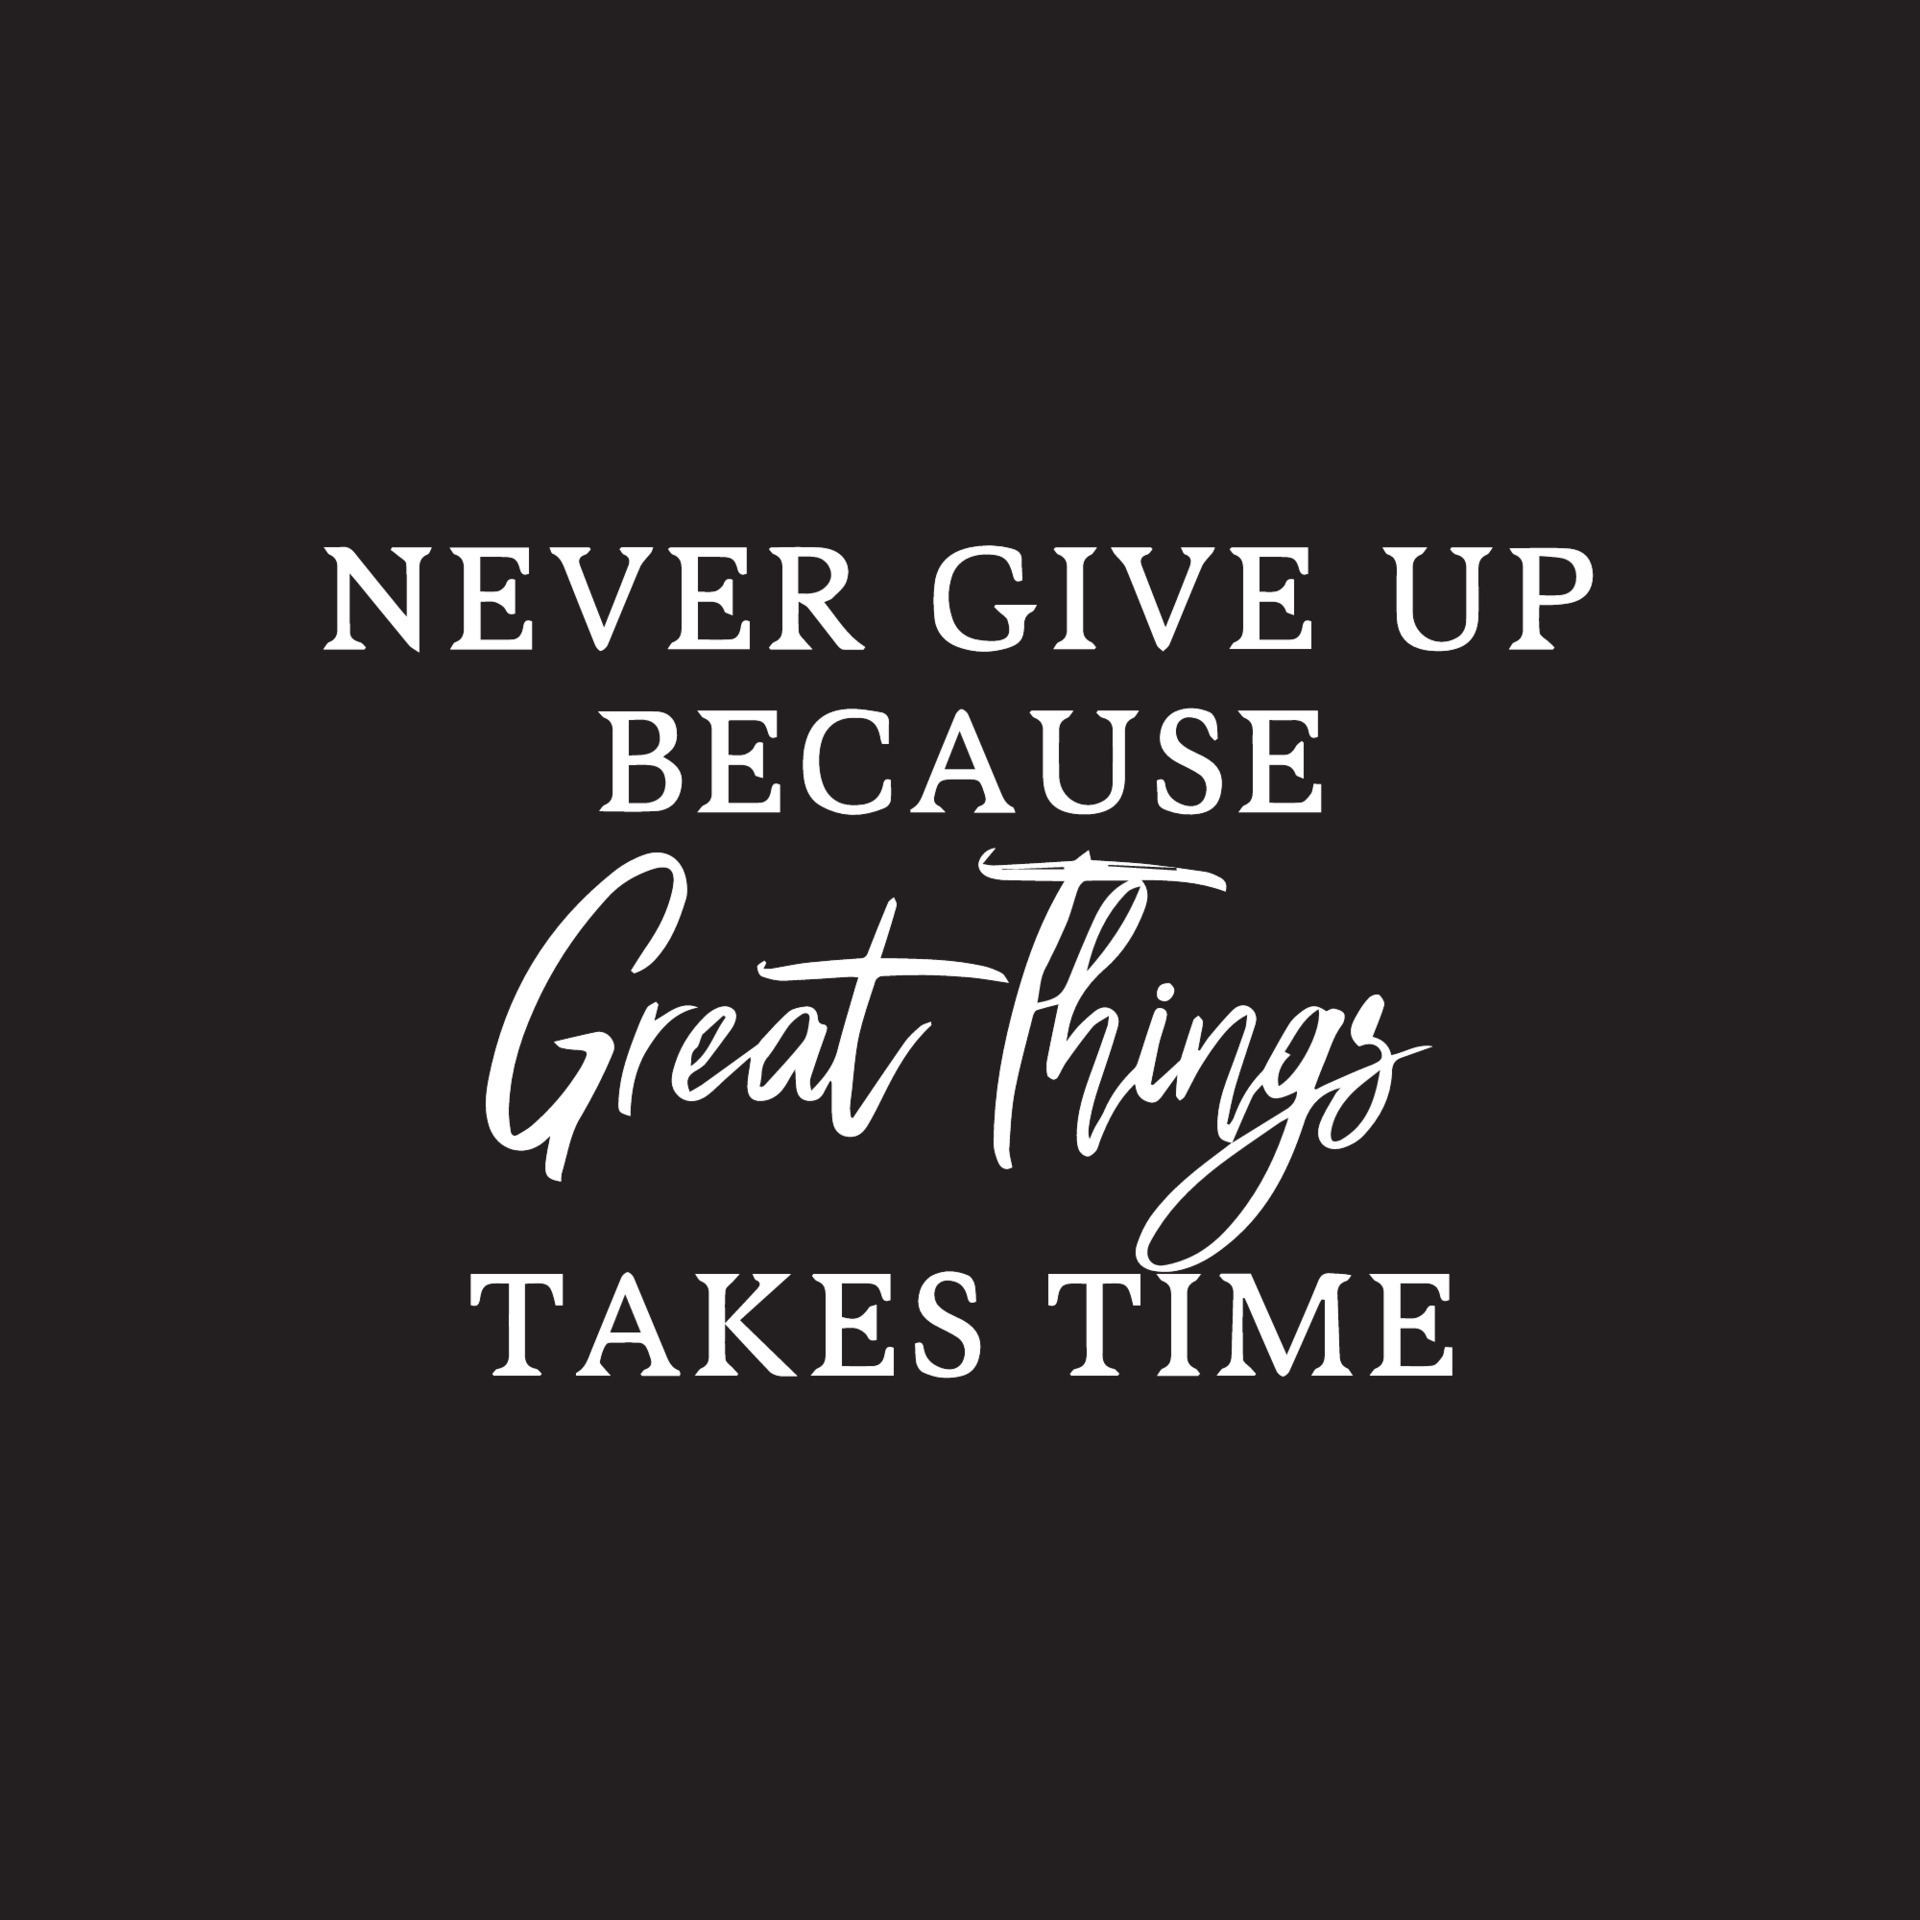 never give up because great things take time essay